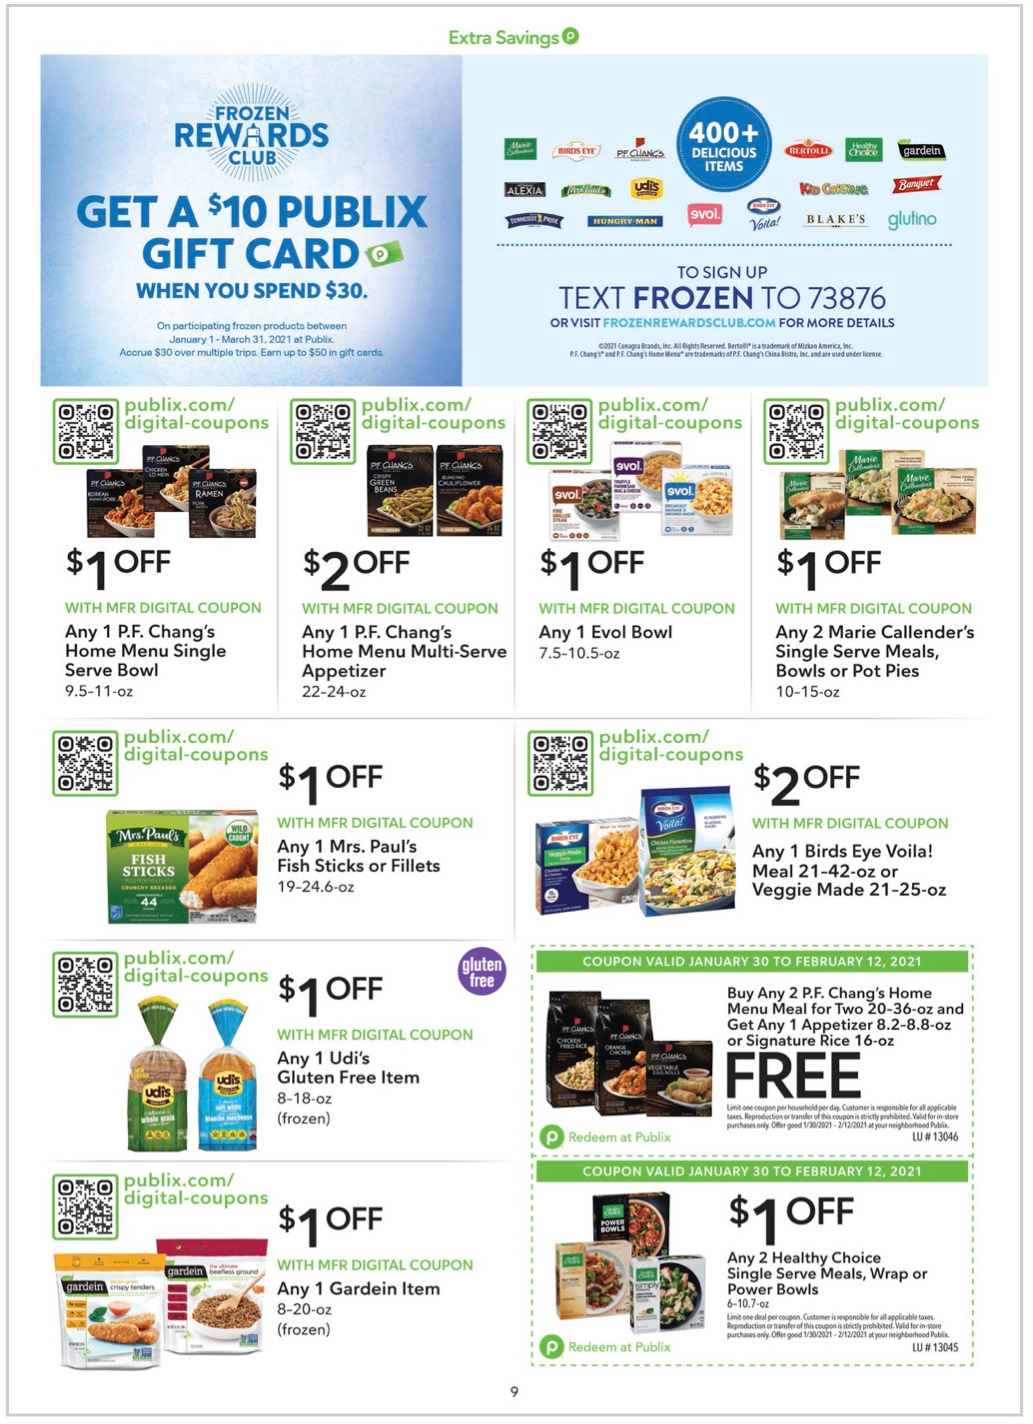 Save On Meals All Week With Frozen Rewards Club - You Don't Want To Miss These Deals! on I Heart Publix 2